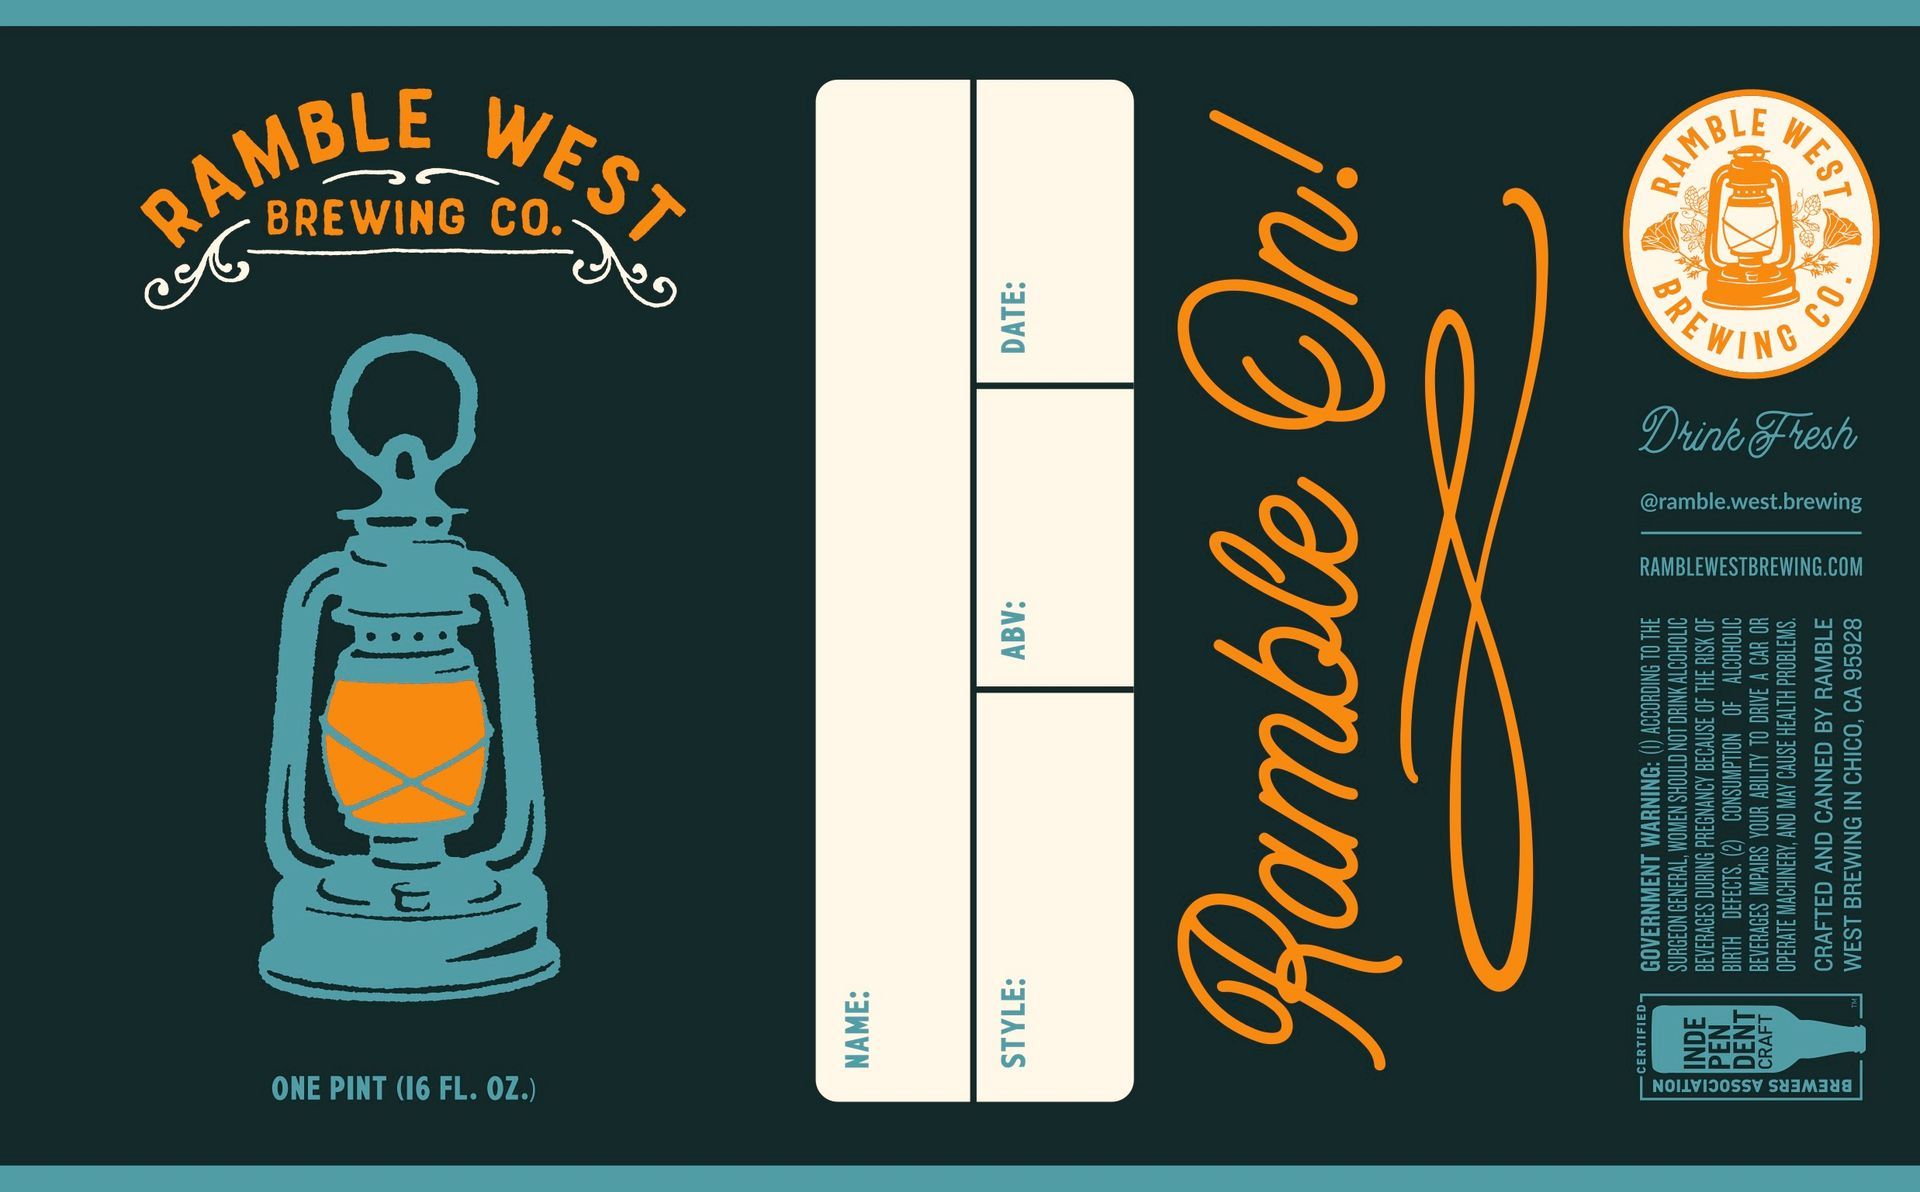 a label for ramble west brewing company with a lantern on it